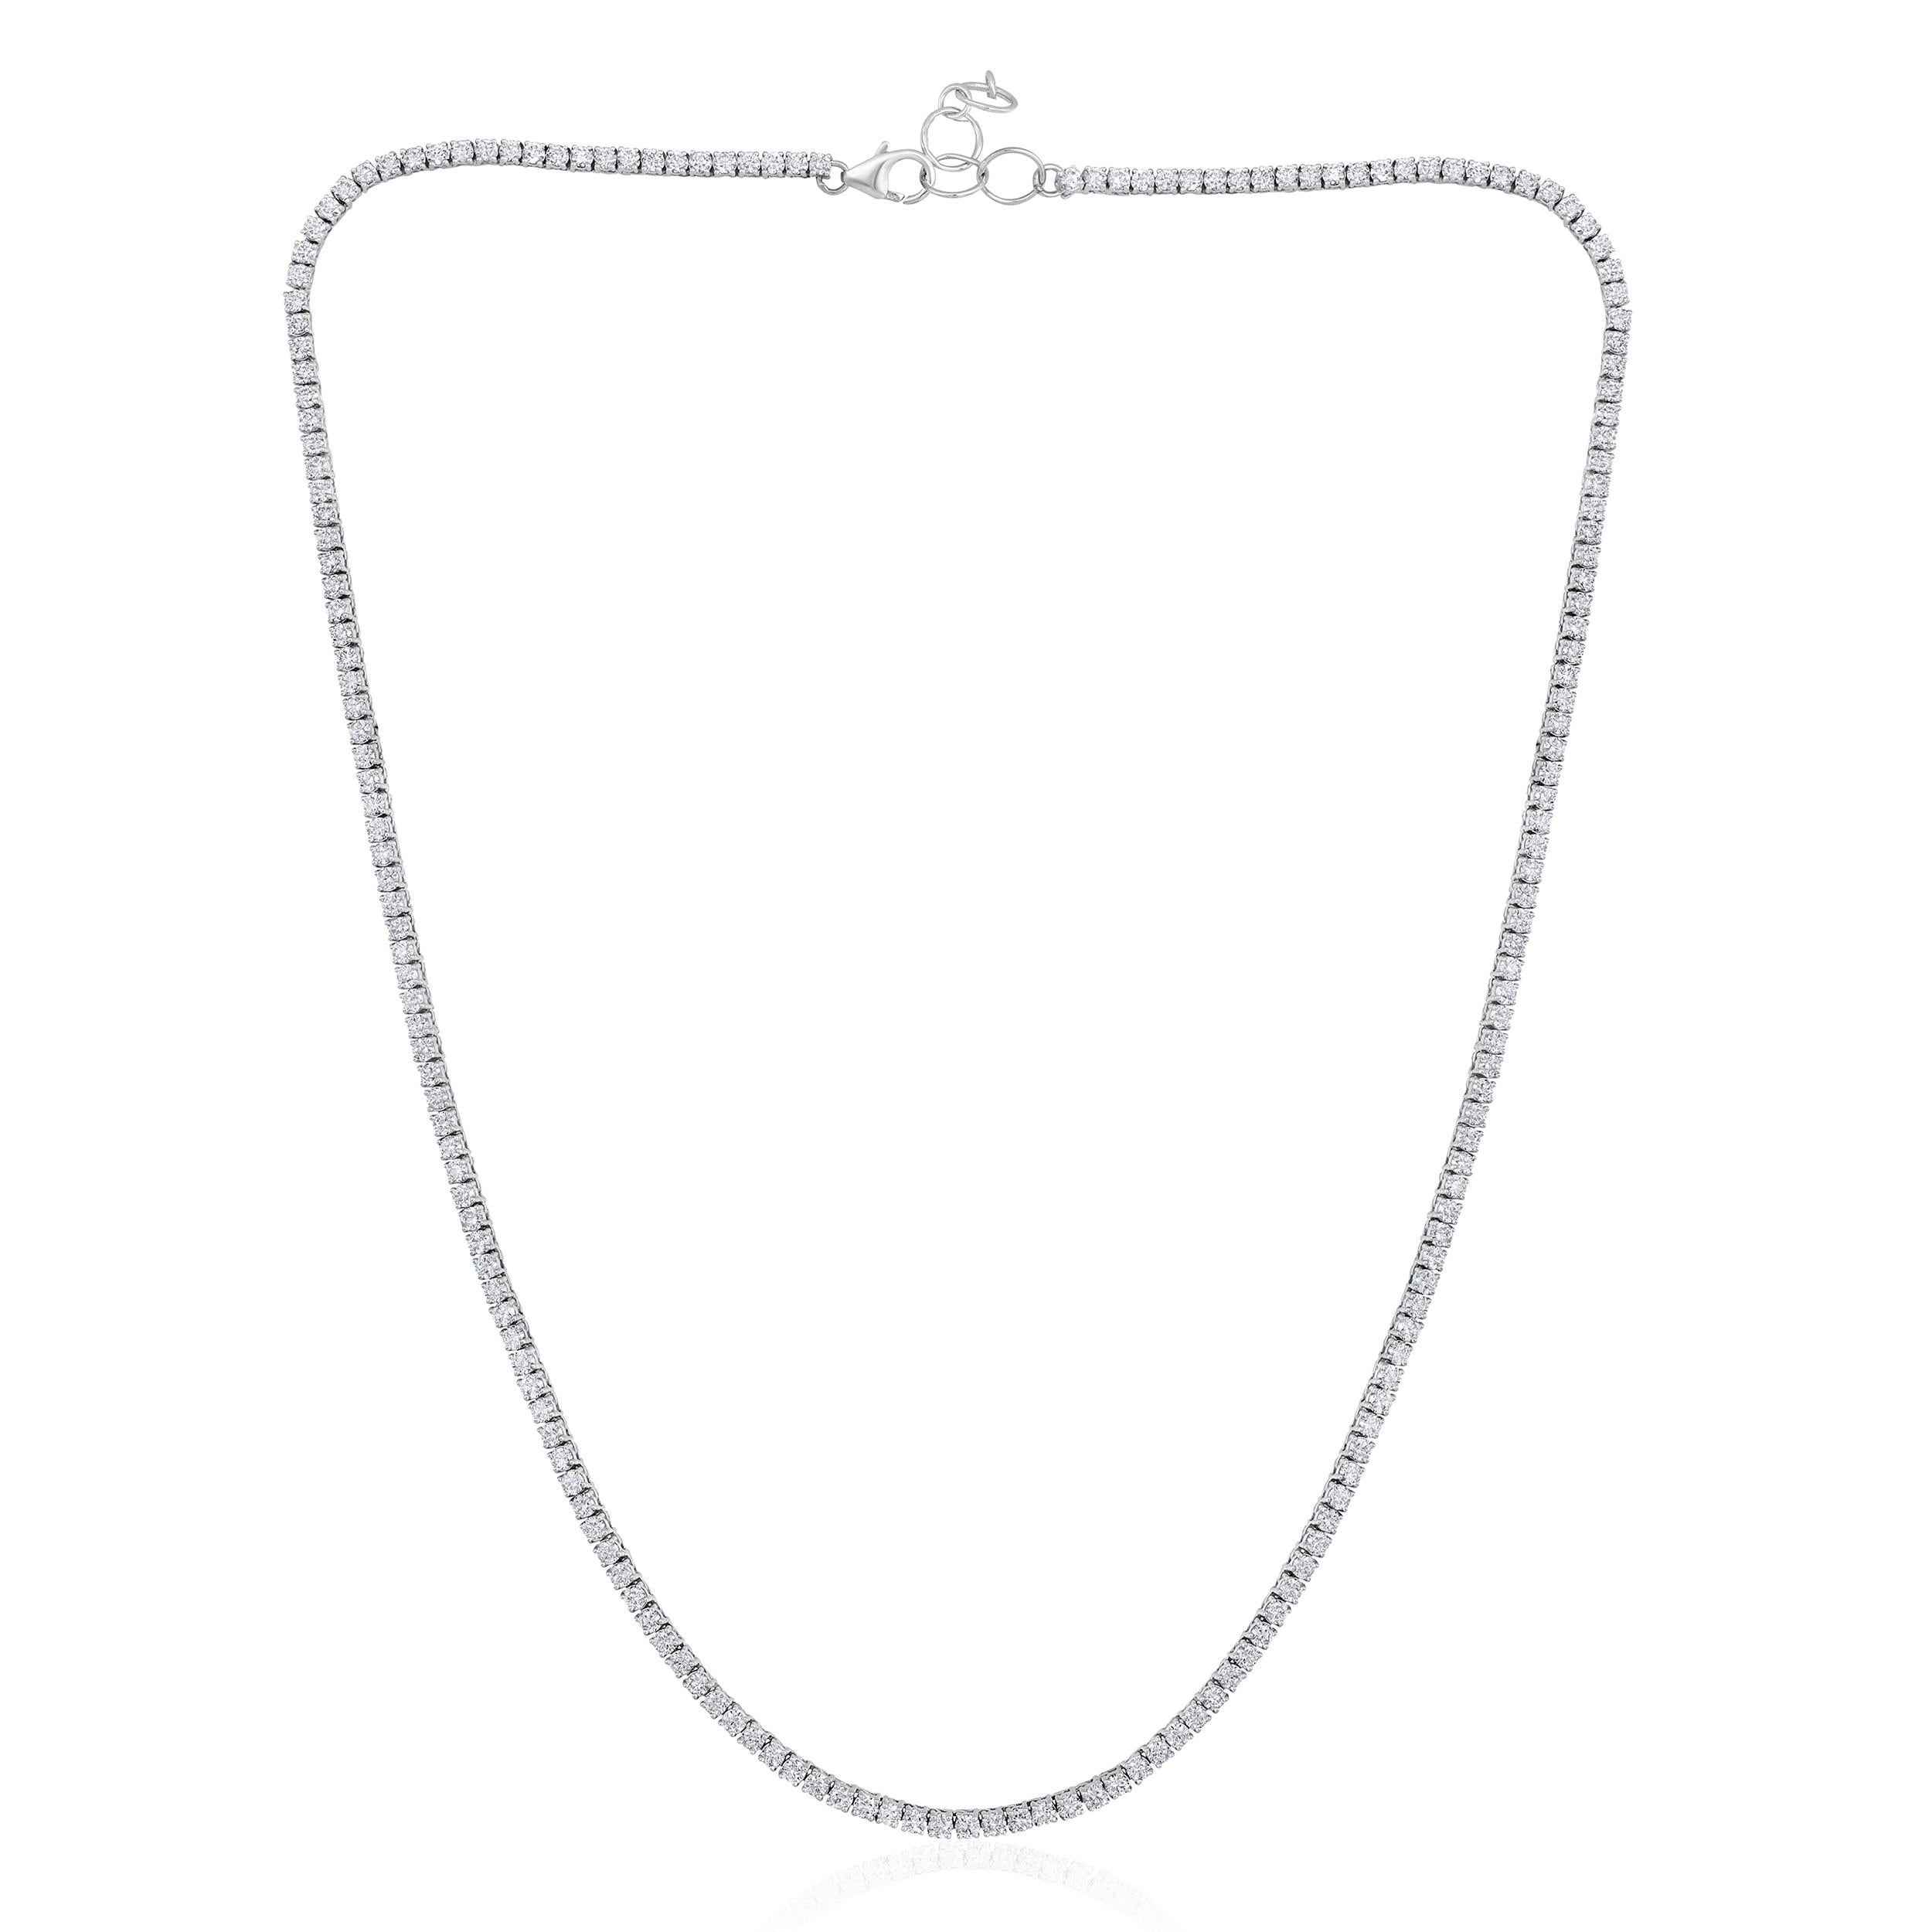 Crafted in 18.8 grams of 14K White Gold, the necklace contains 131 stones of Round Diamonds with a total of 8.61 carat in F-G color and VS-SI carat. The necklace length is 16 inches.

This jewelry piece will be expertly crafted by our skilled